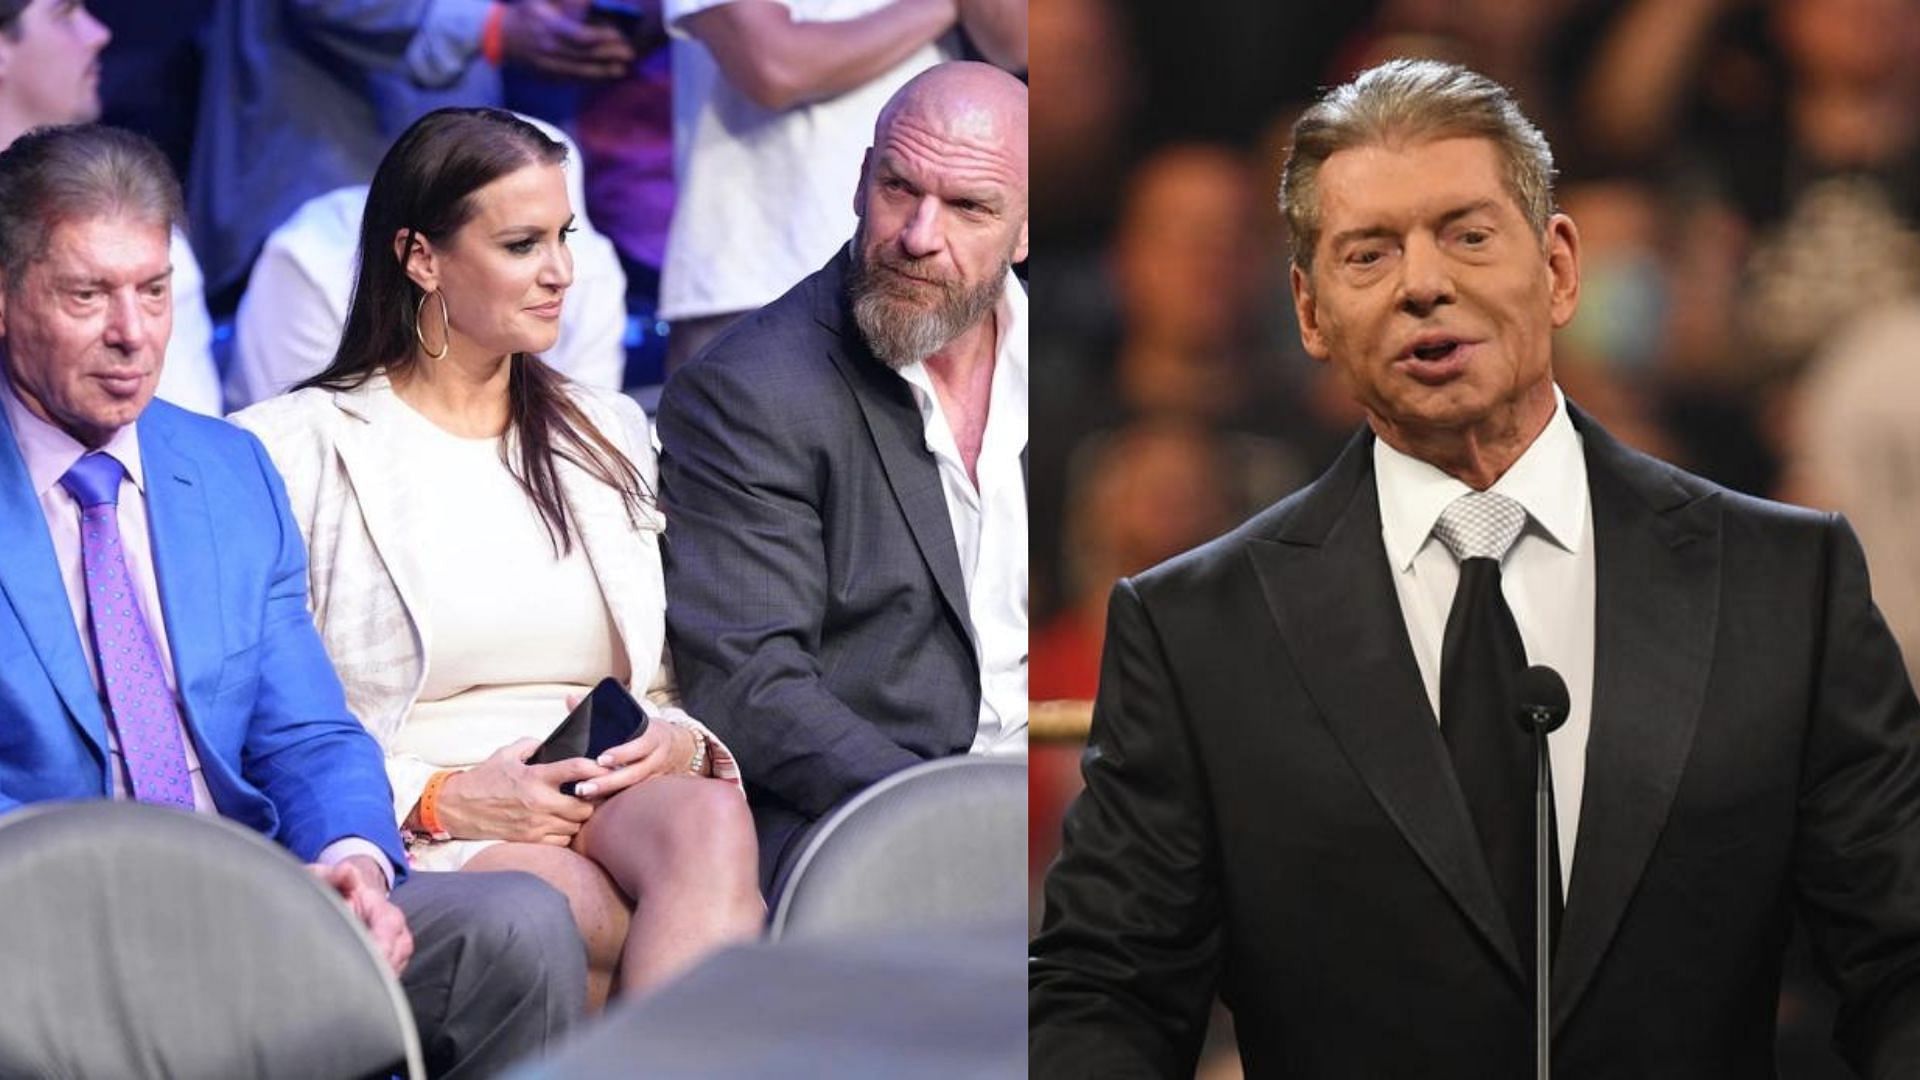 Who did Vince McMahon remove from WWE's Board of Directors?